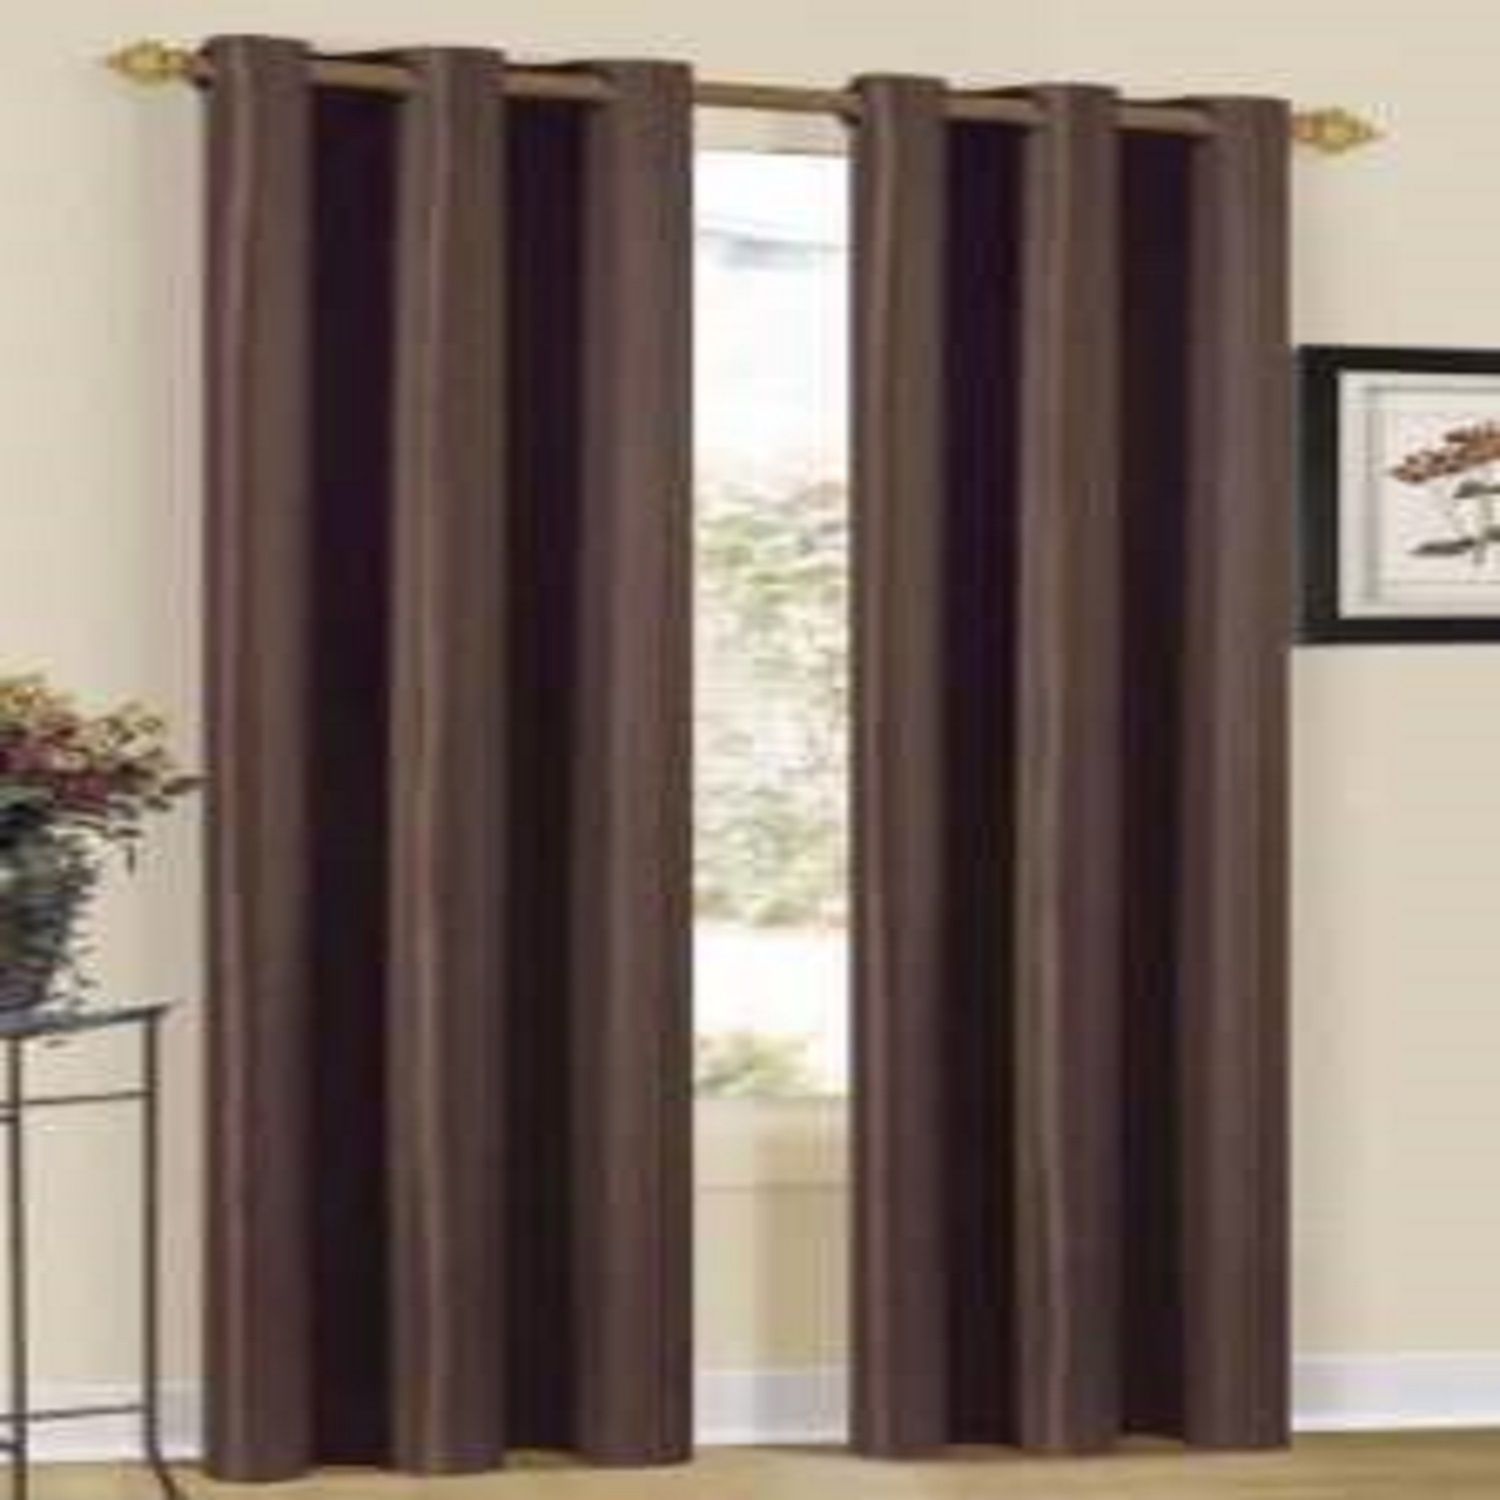 Image for Duck River Textile Herringbone Solid 2-pack Window Curtain Set at Kohl's.